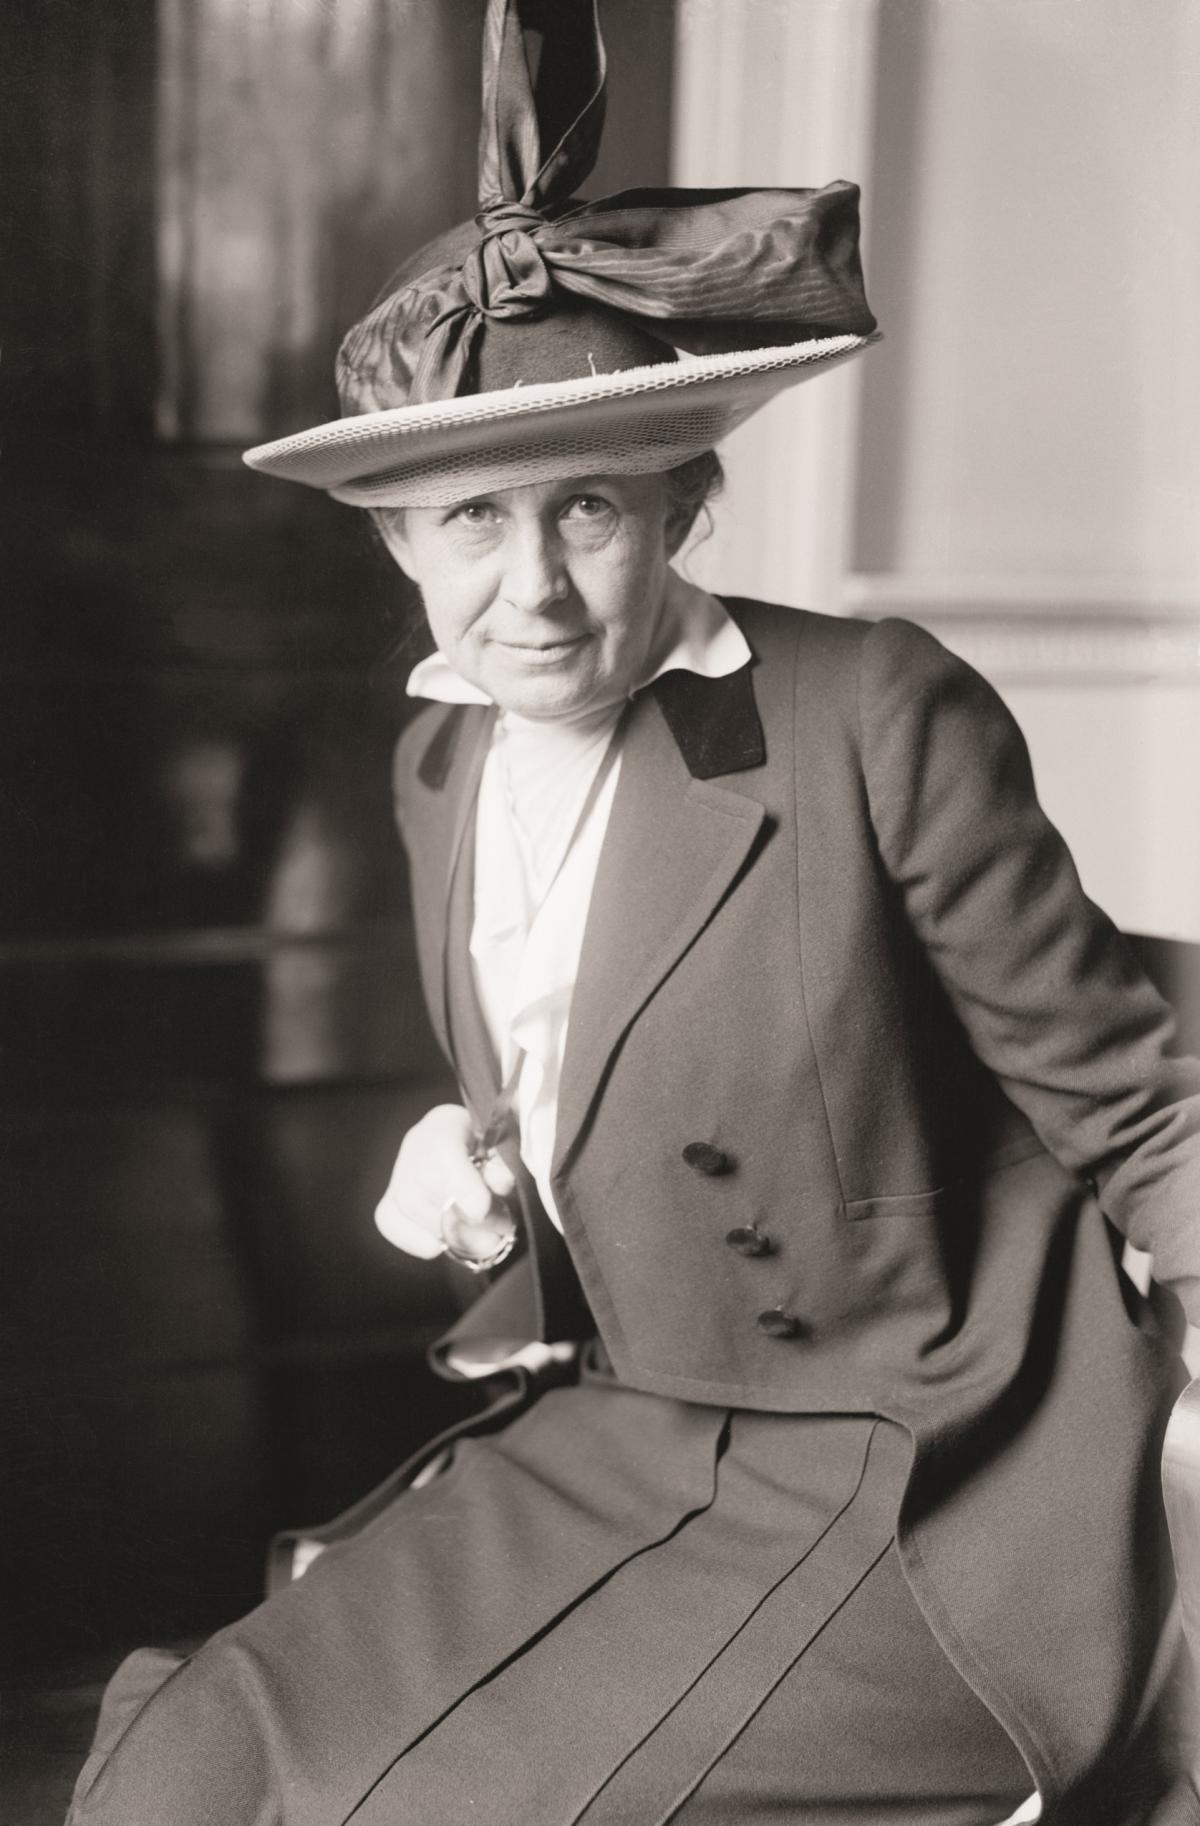 Black and white photograph of a woman in a hat